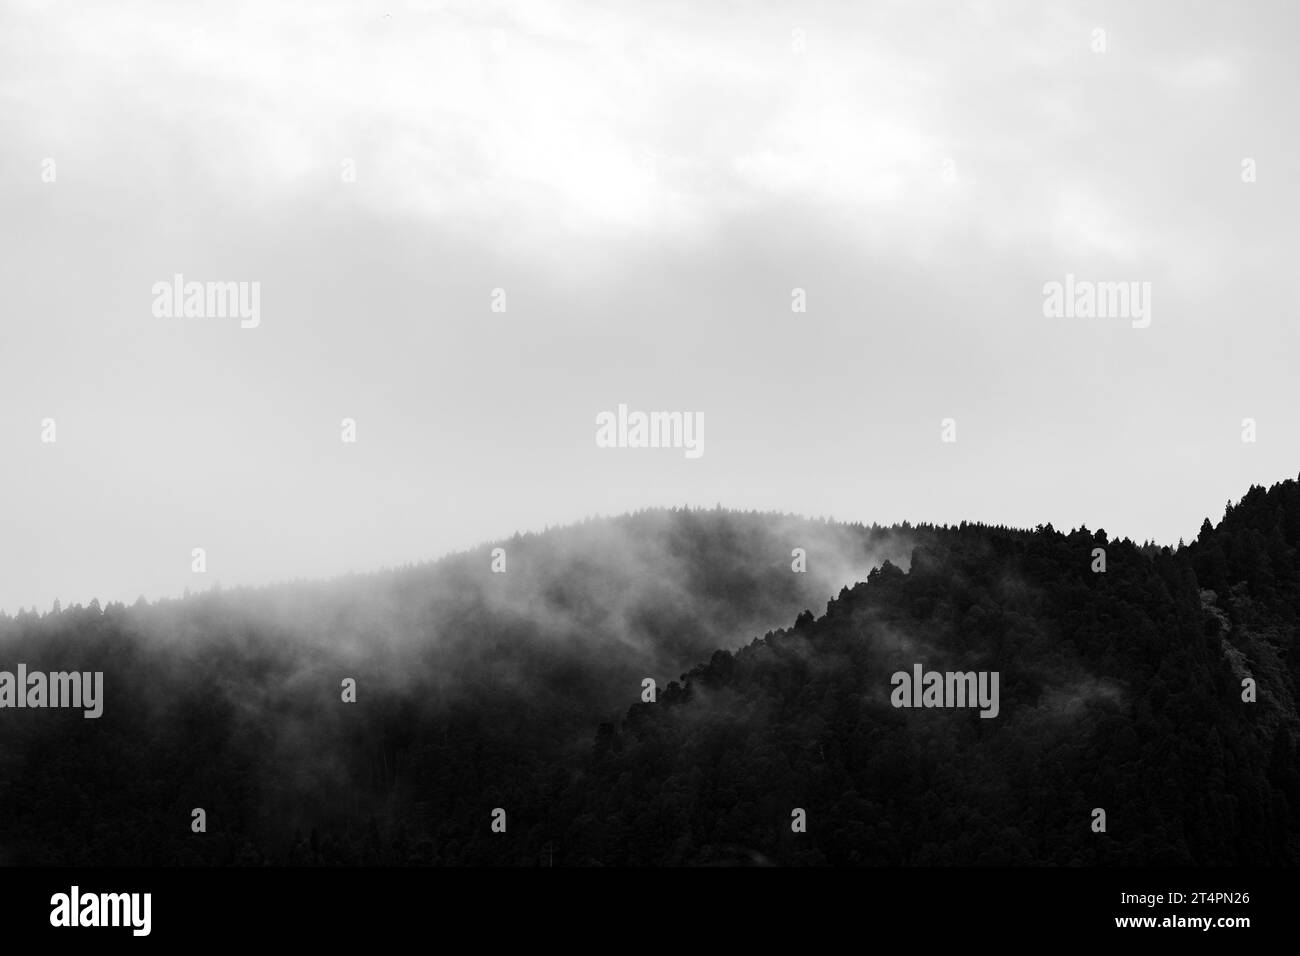 Mysterious landscape with fog and trees on crater rim, Furnas, Azores islands. Stock Photo